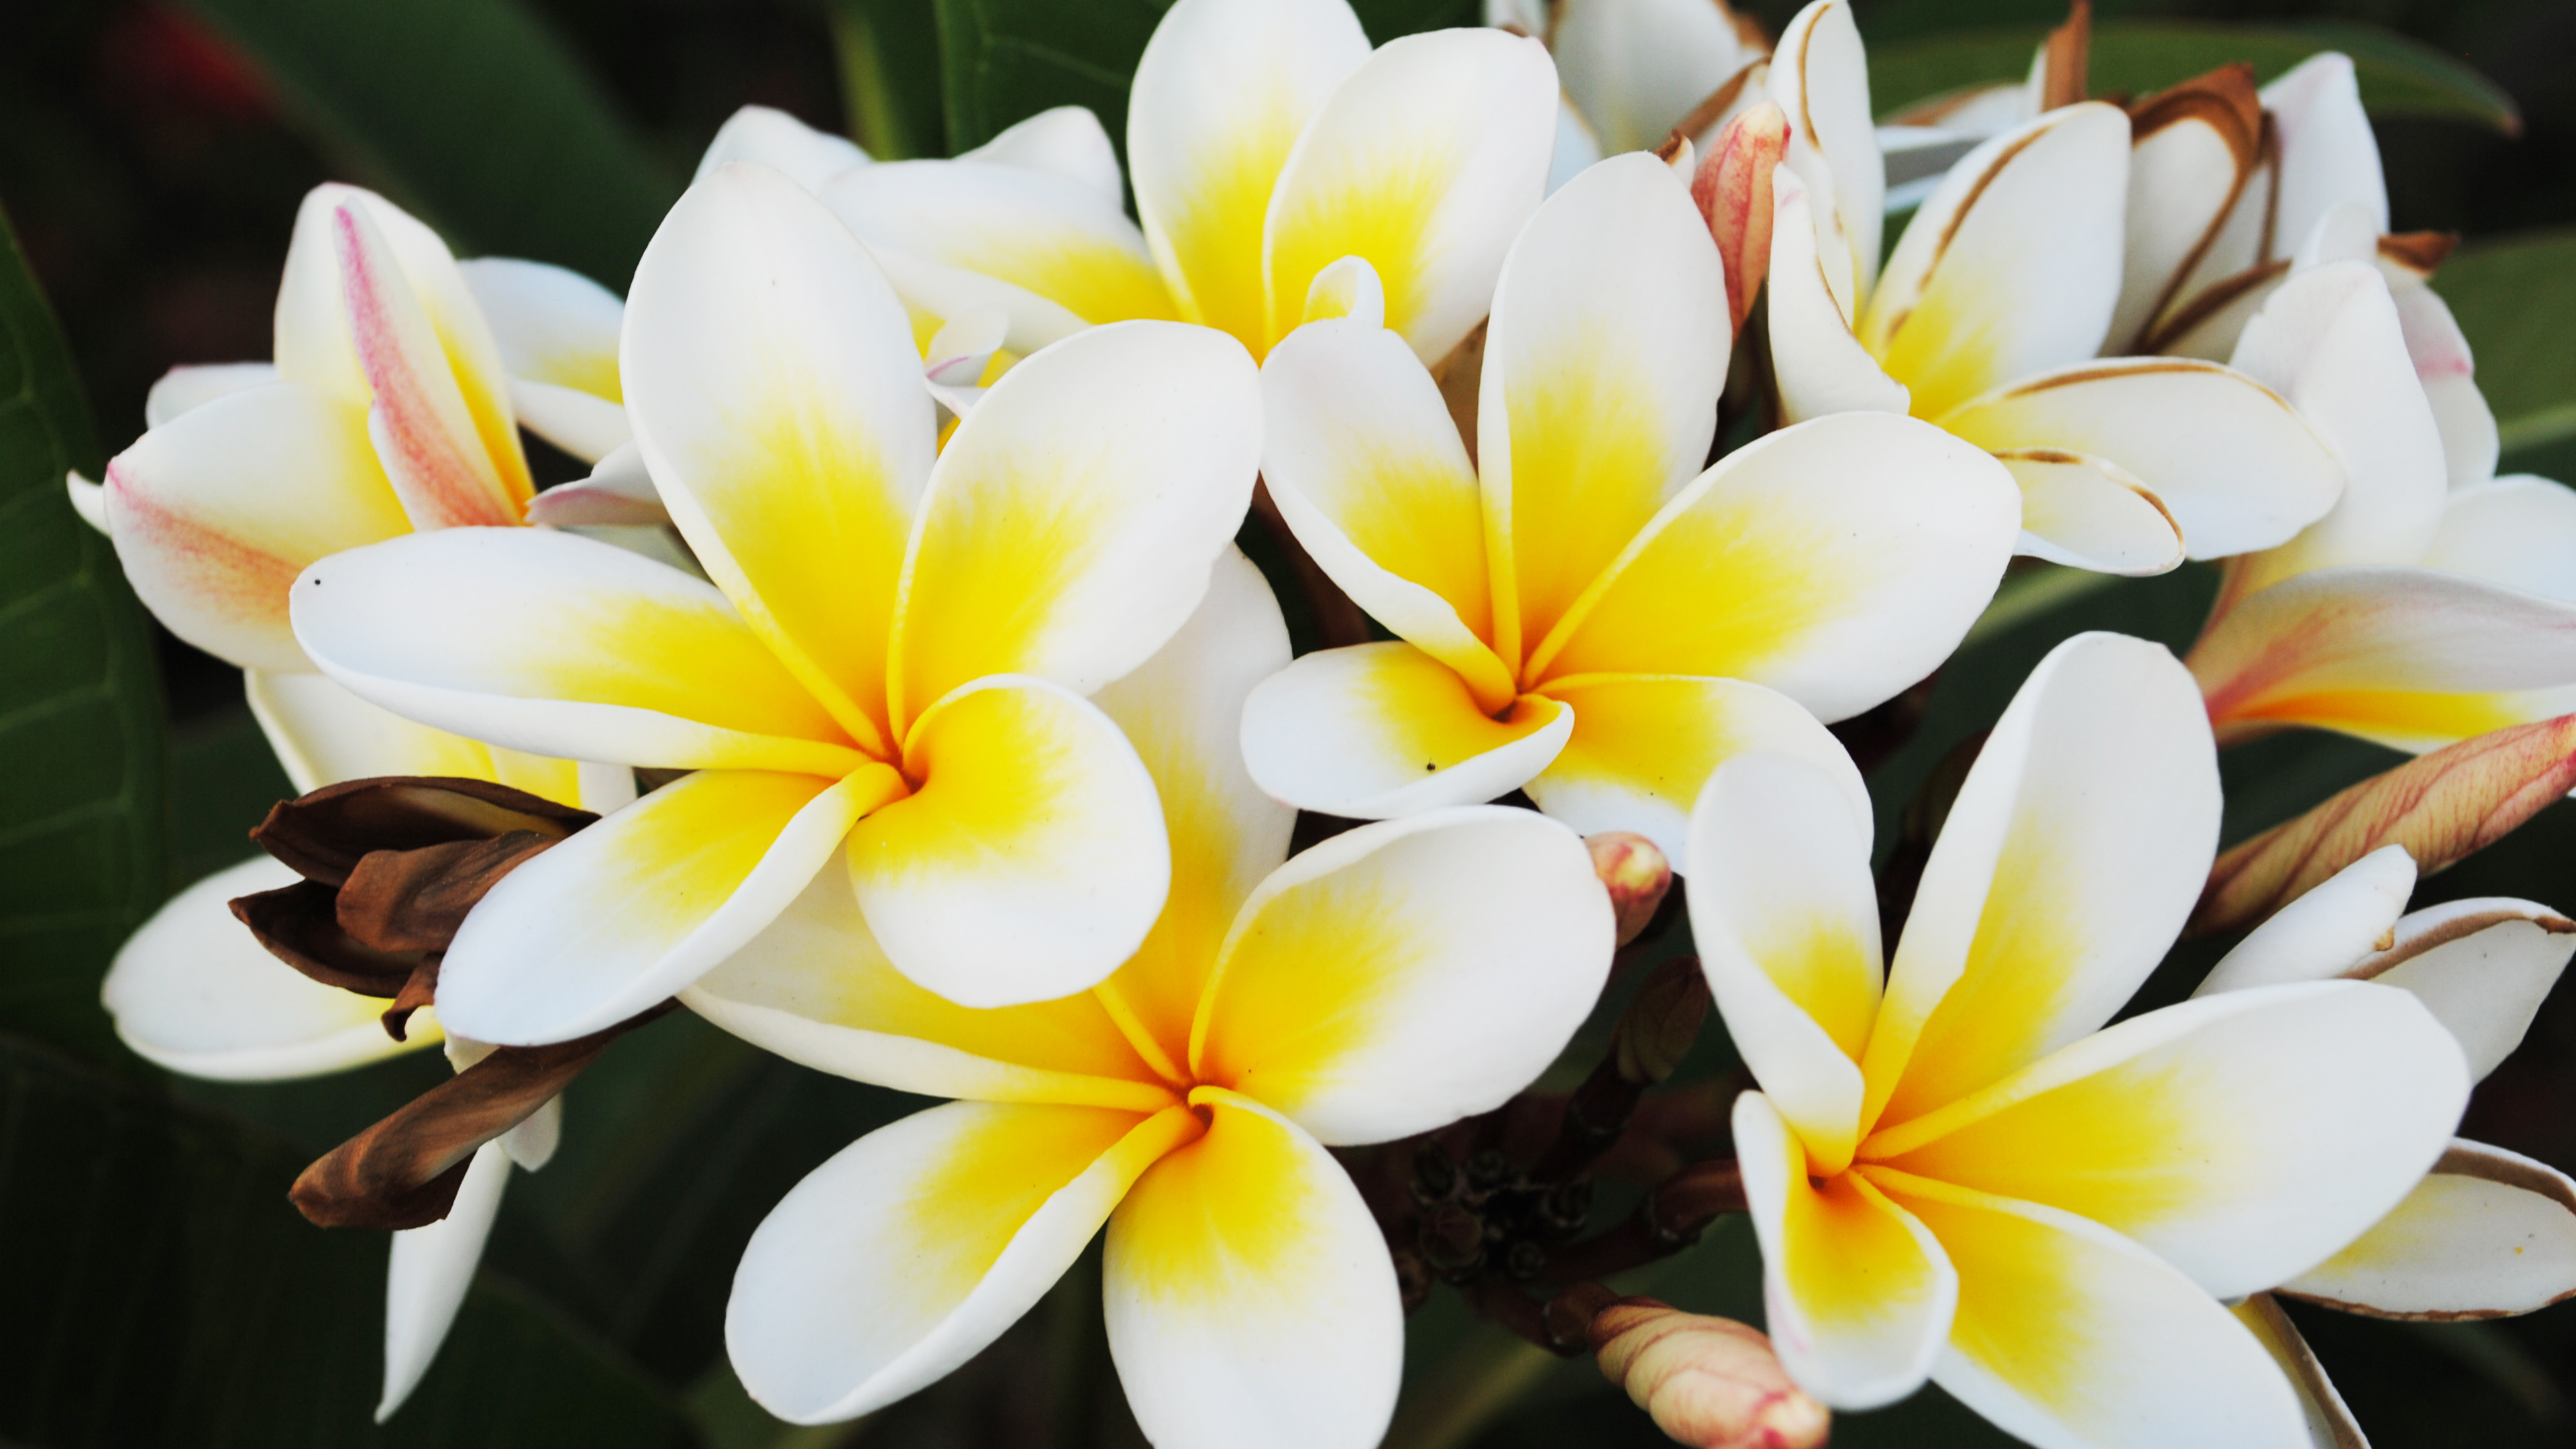 White and Yellow Flower in Close up Photography. Wallpaper in 3840x2160 Resolution